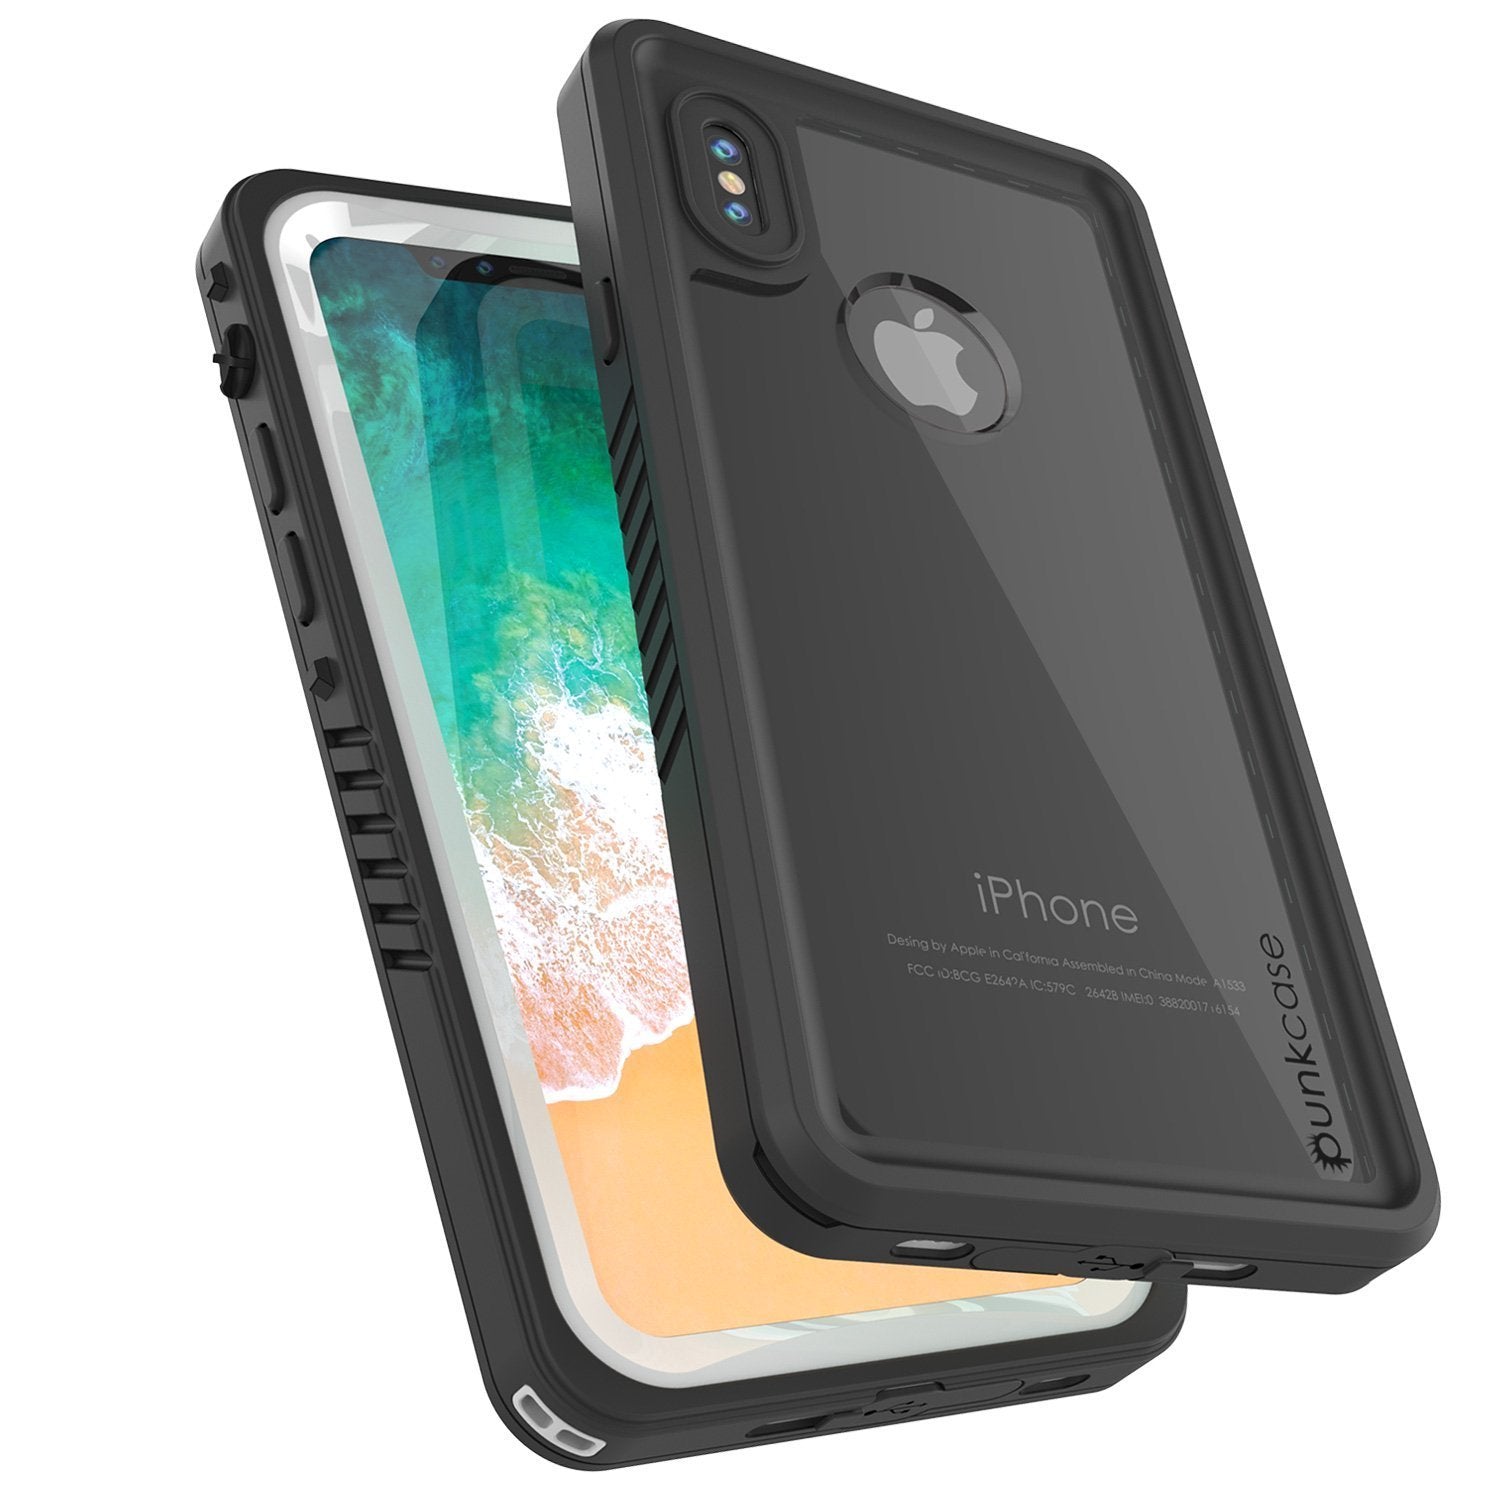 iPhone XS Max Waterproof Case, Punkcase [Extreme Series] Armor Cover W/ Built In Screen Protector [White] - PunkCase NZ